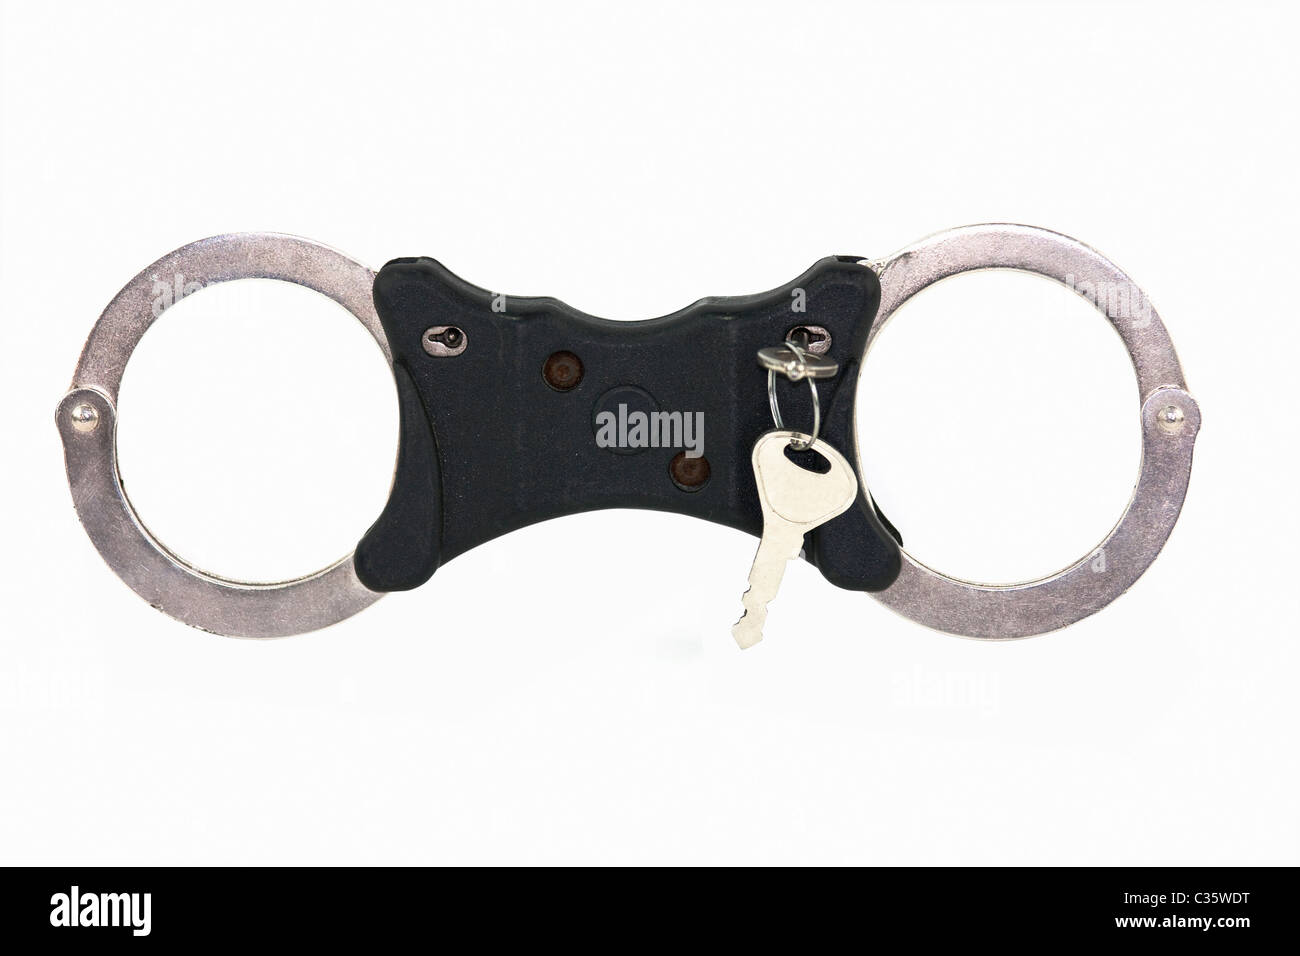 isolated closed handcuffs on white background with key Stock Photo